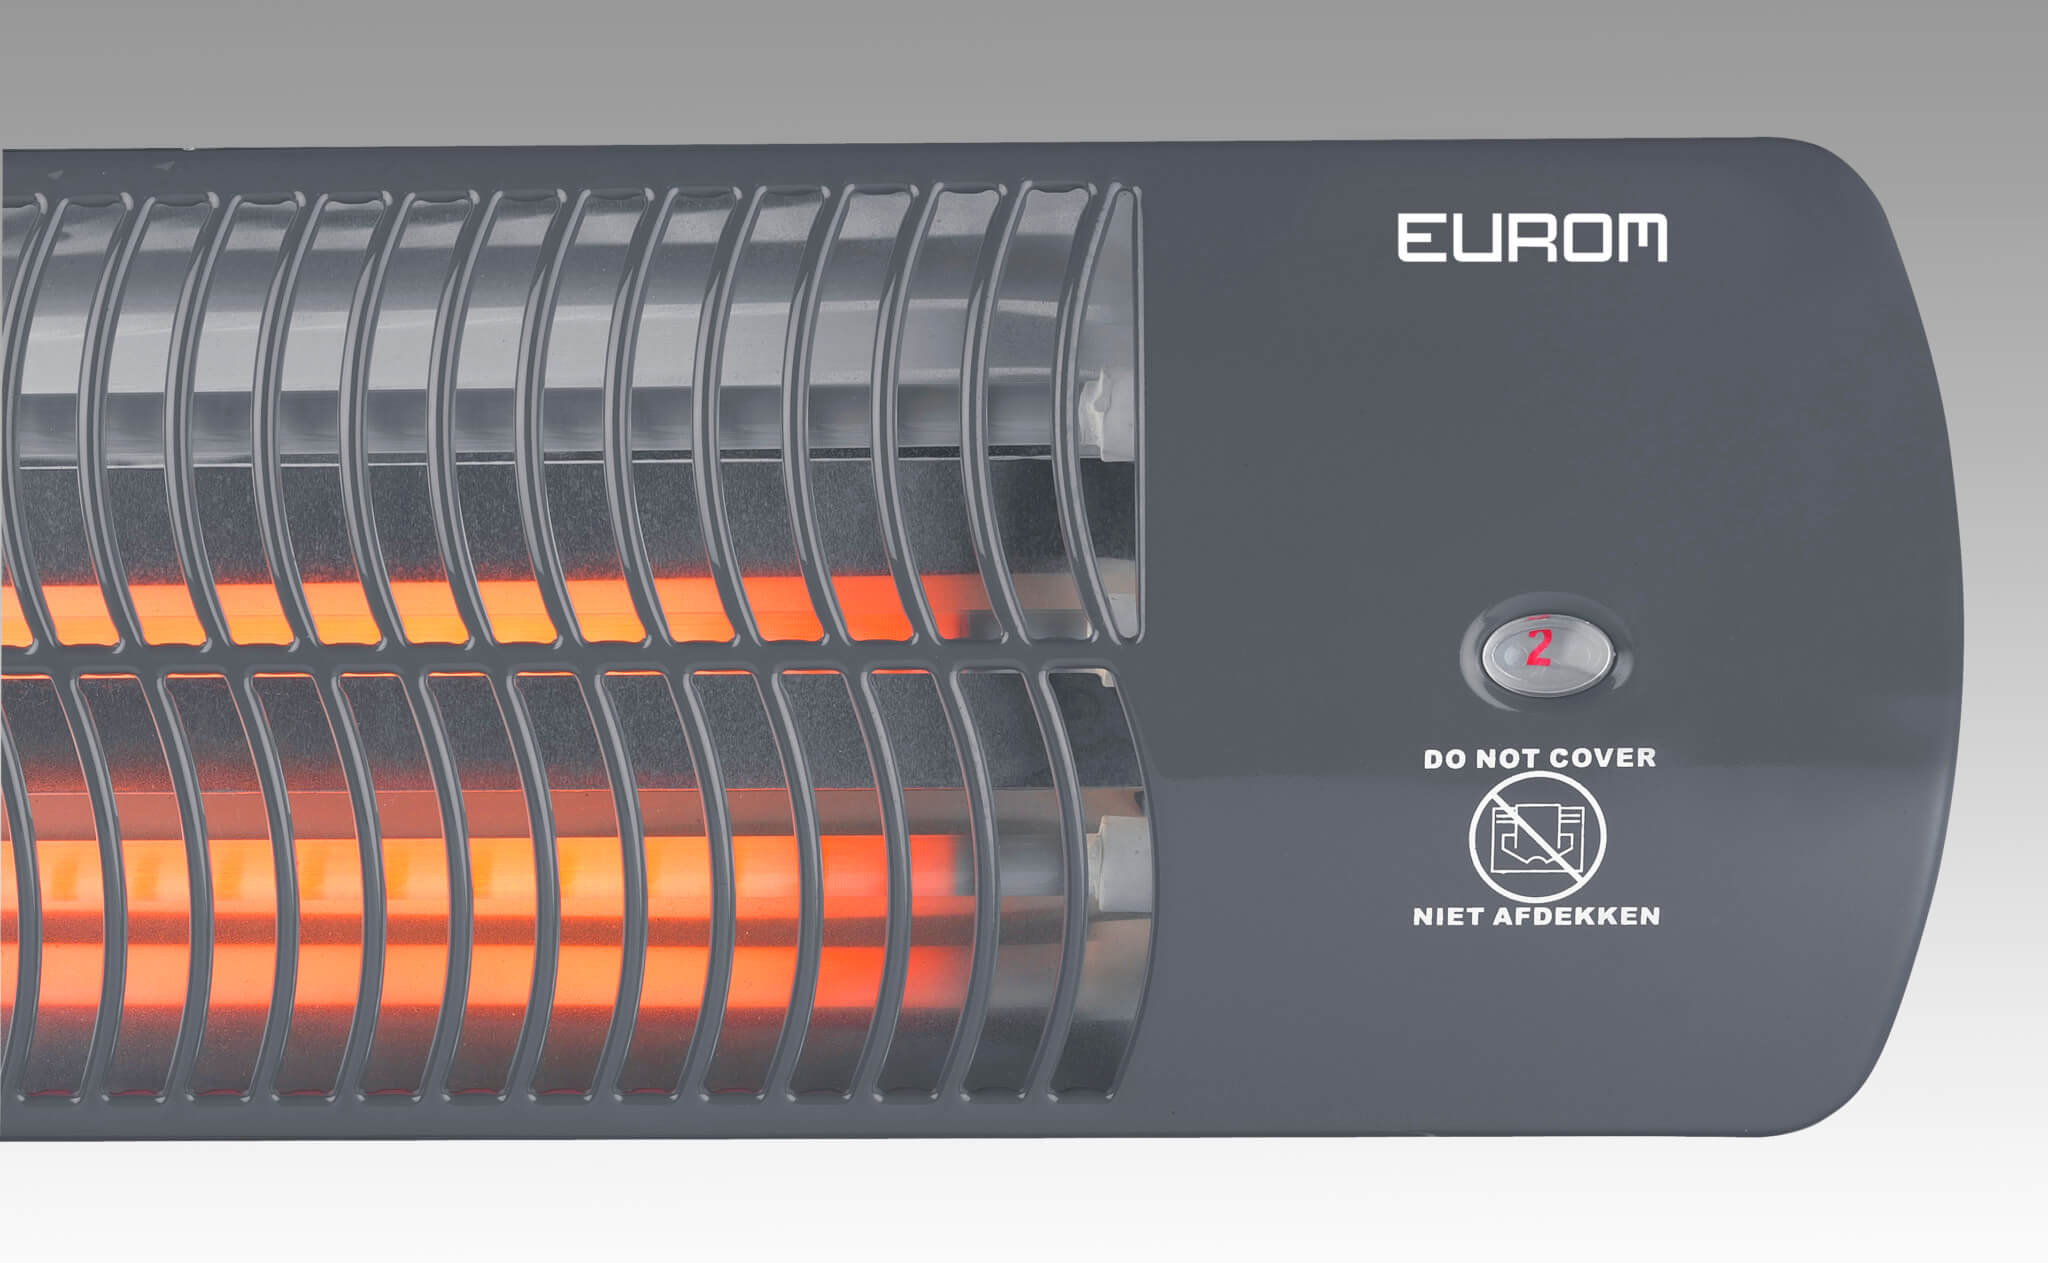 Eurom Q-Time 1500 is perfectly suited to heat the small terrace or balcony